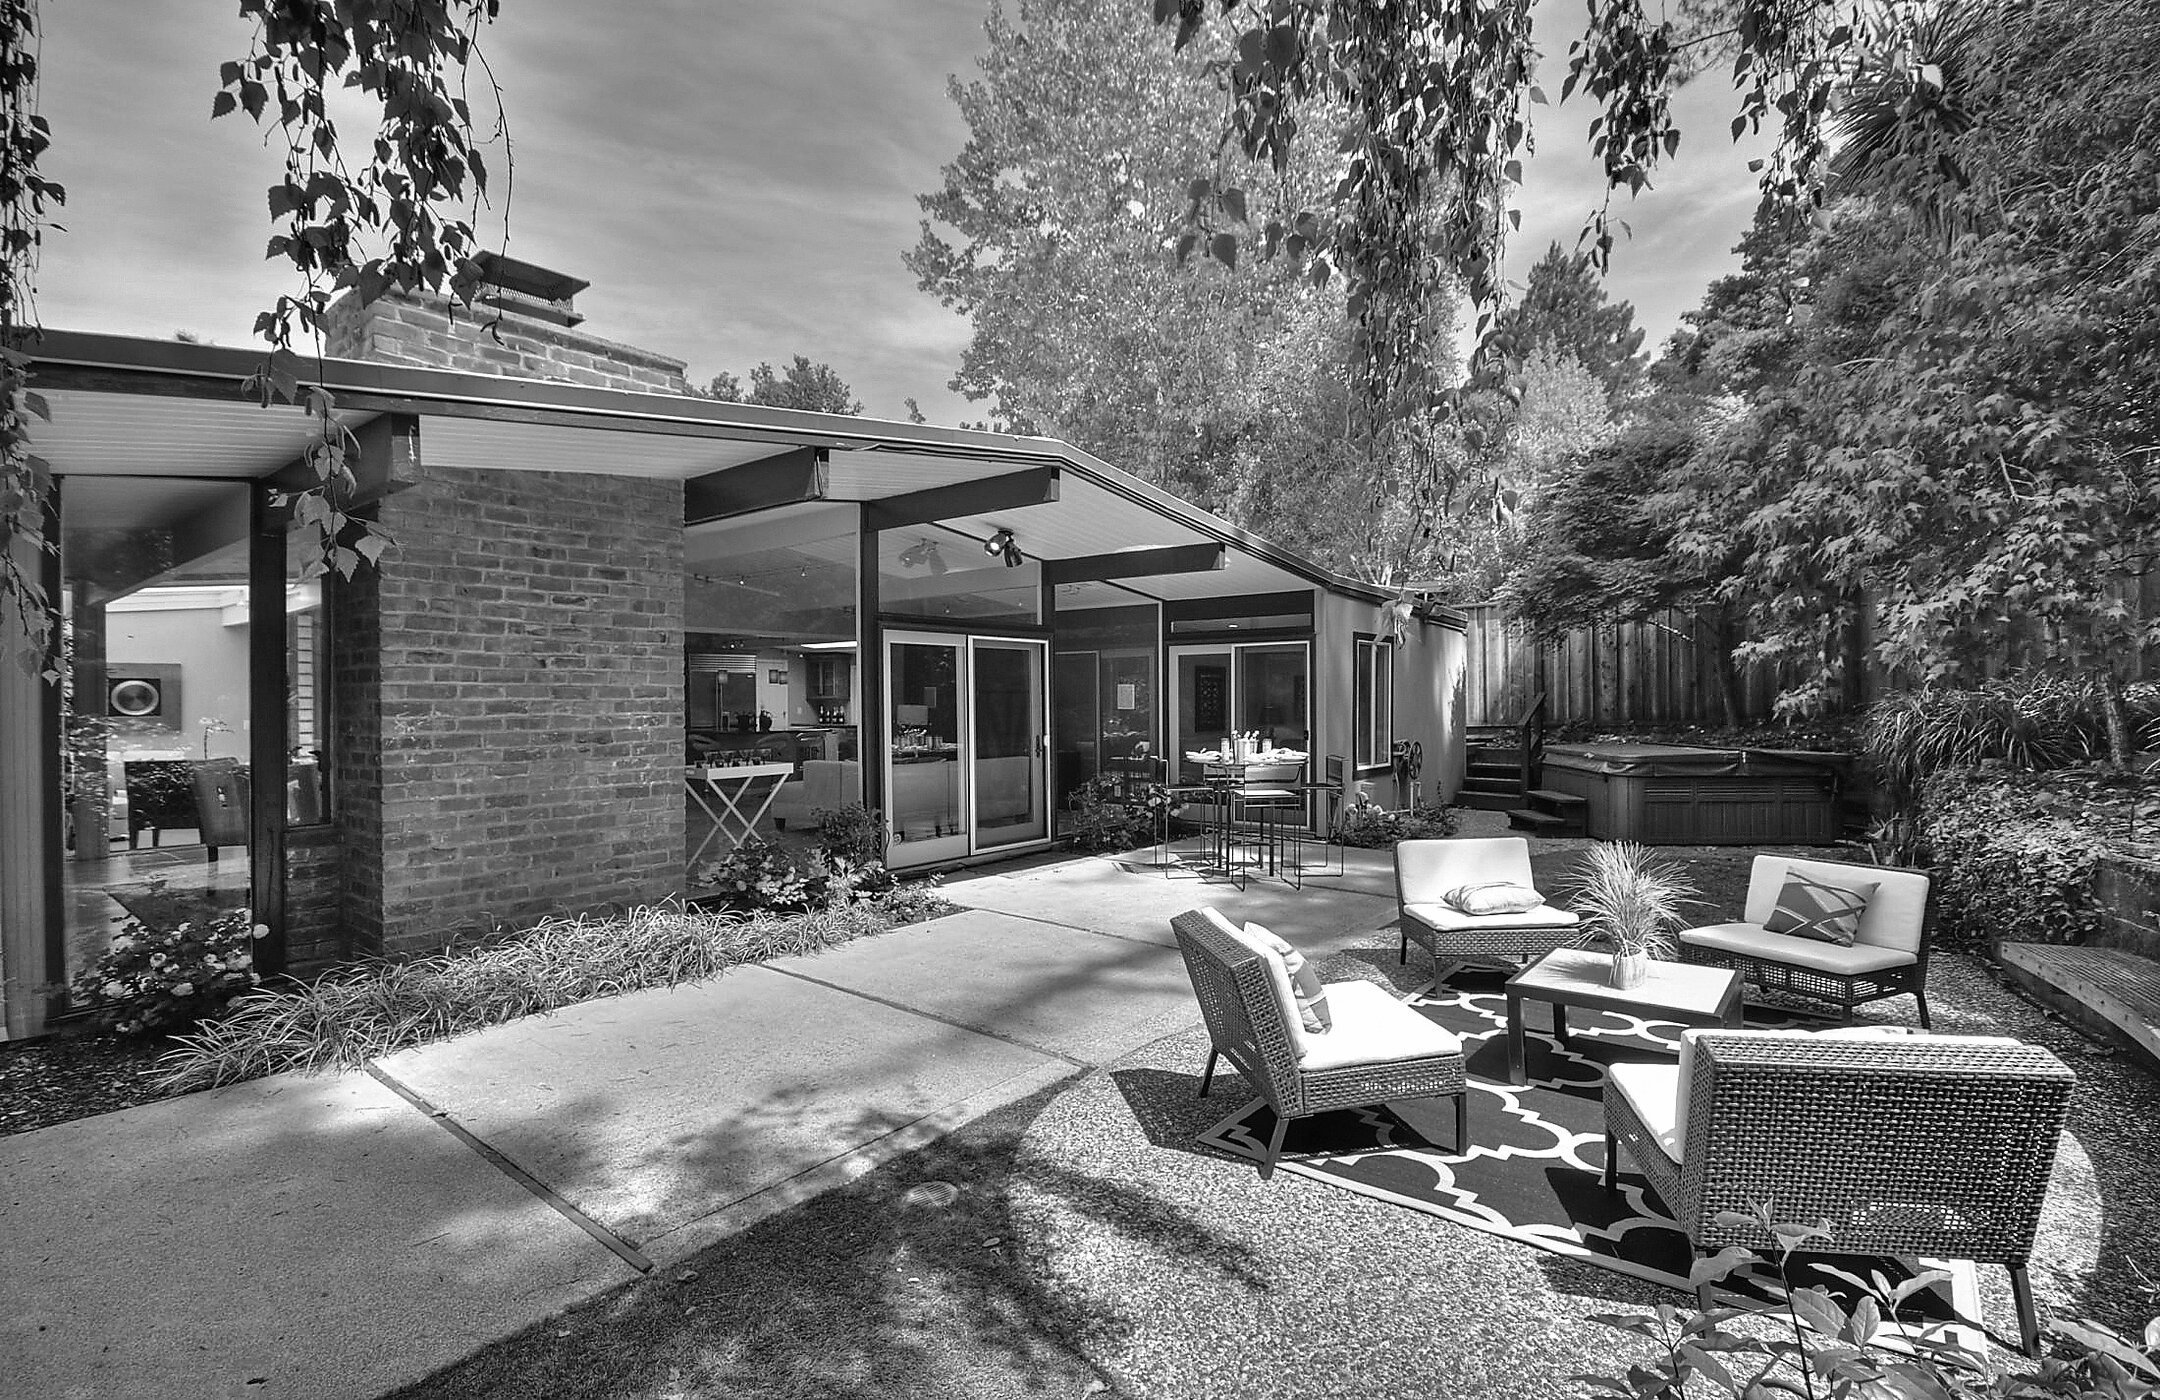 [Our Properties: Eichler home in San Mateo]